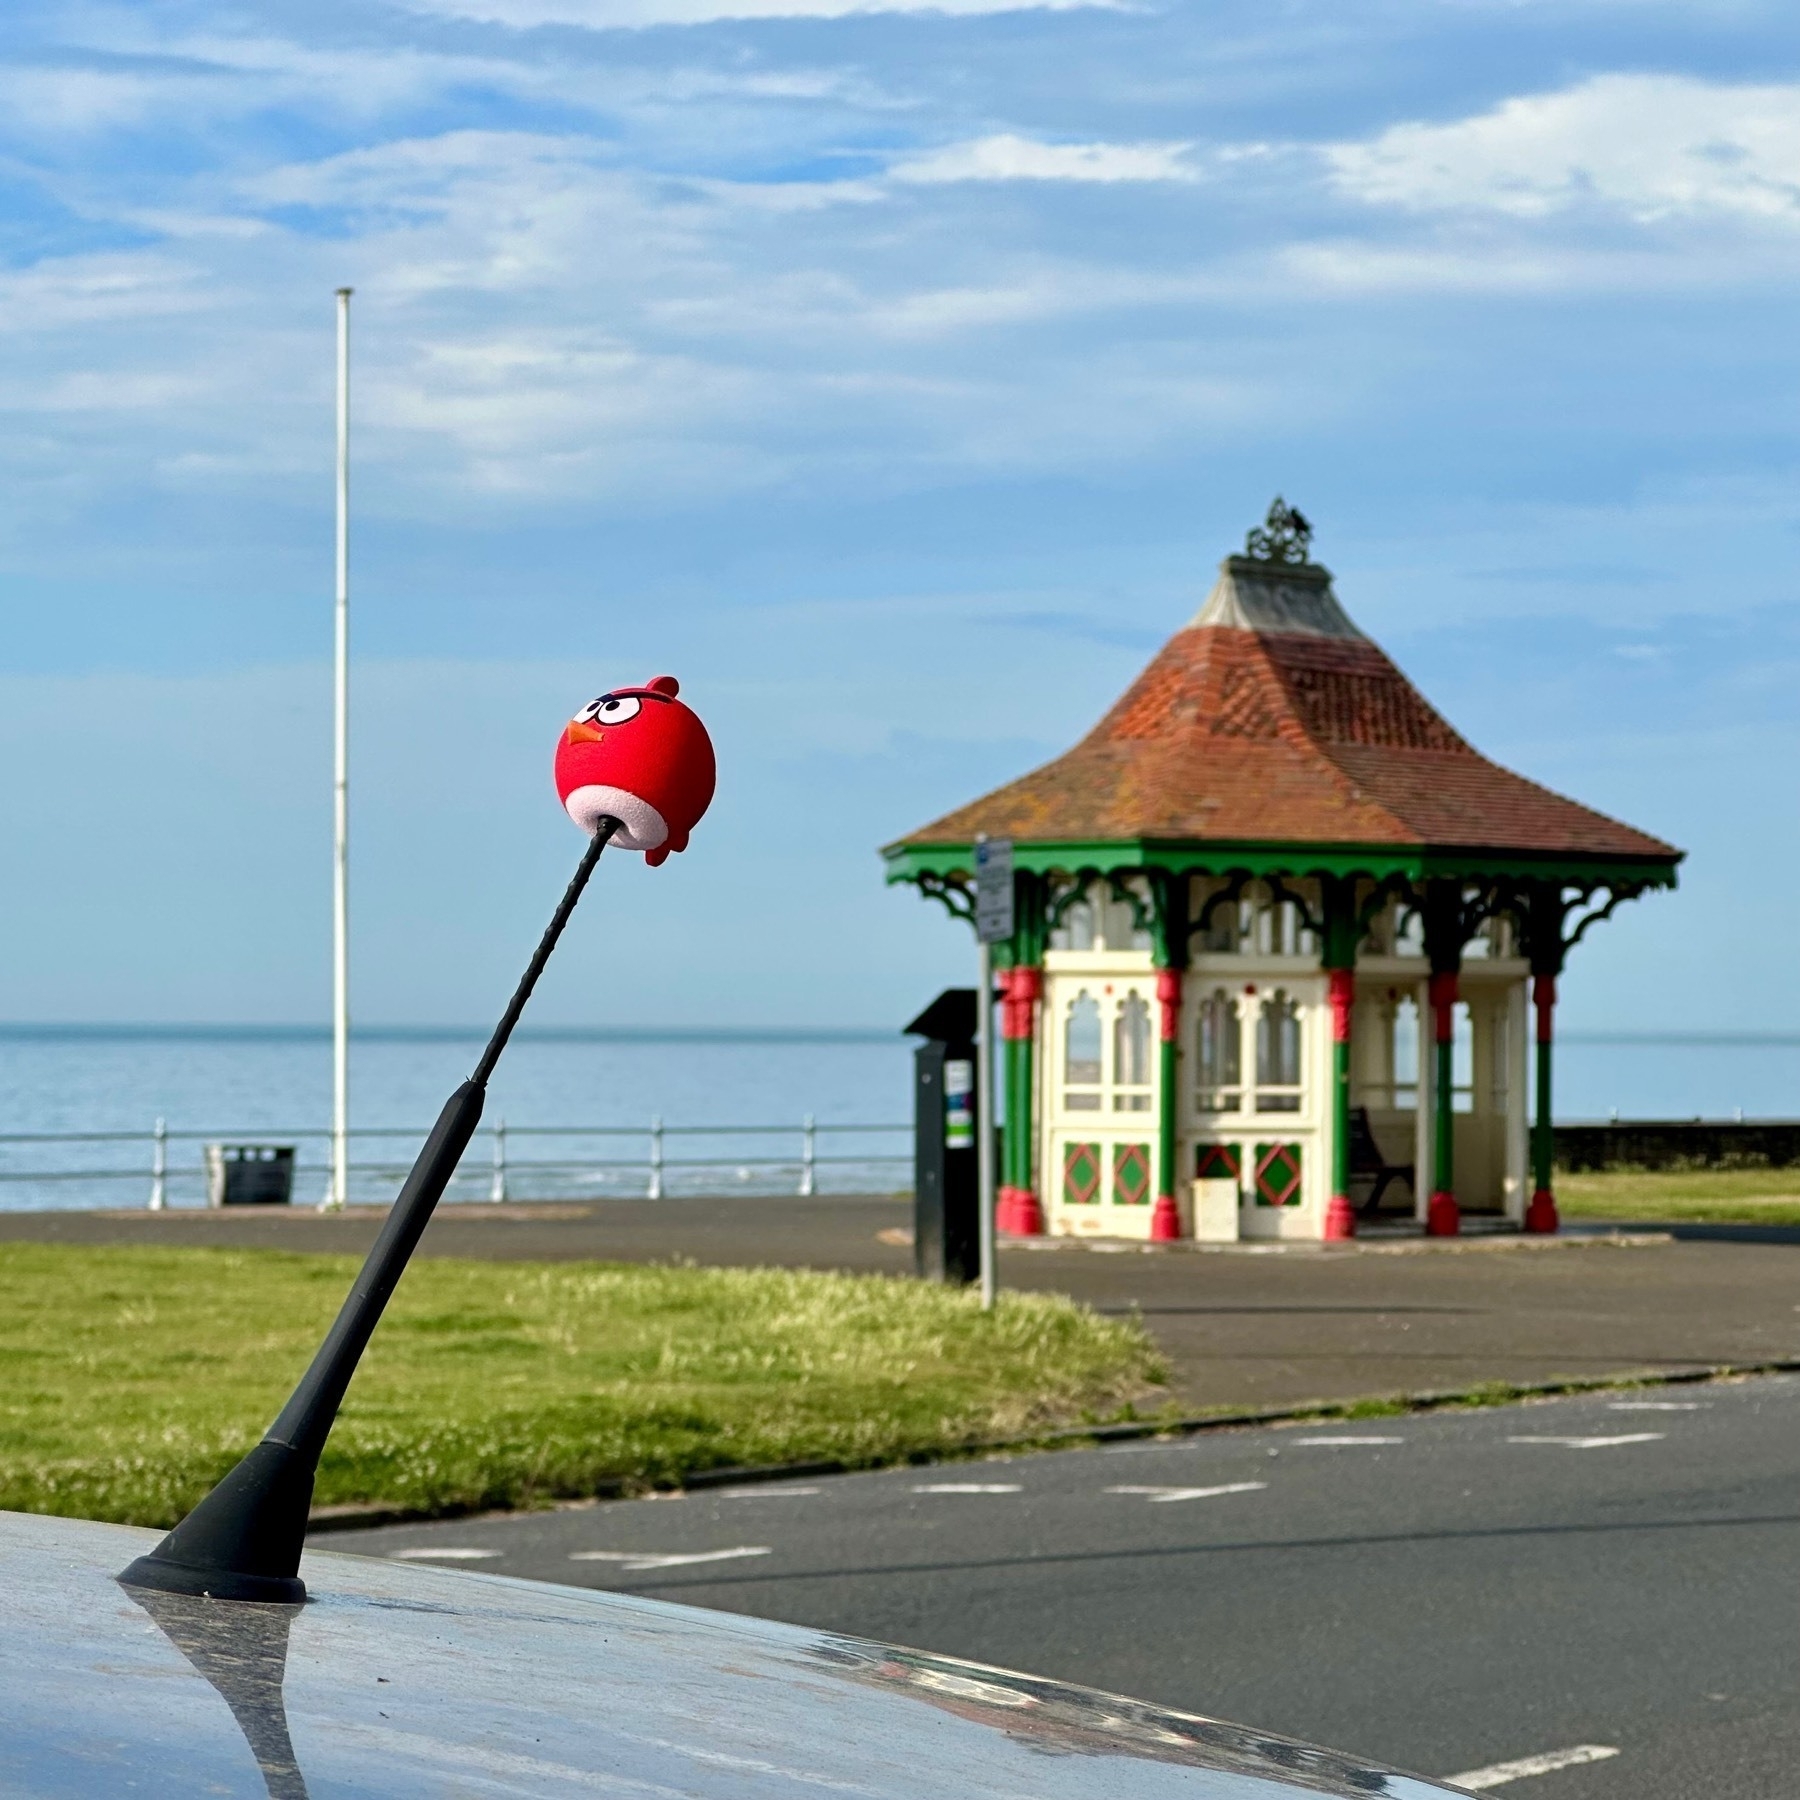 Red "Angry Bird" aerial topper on a car, in front of an old Victorian shelter on the promenade